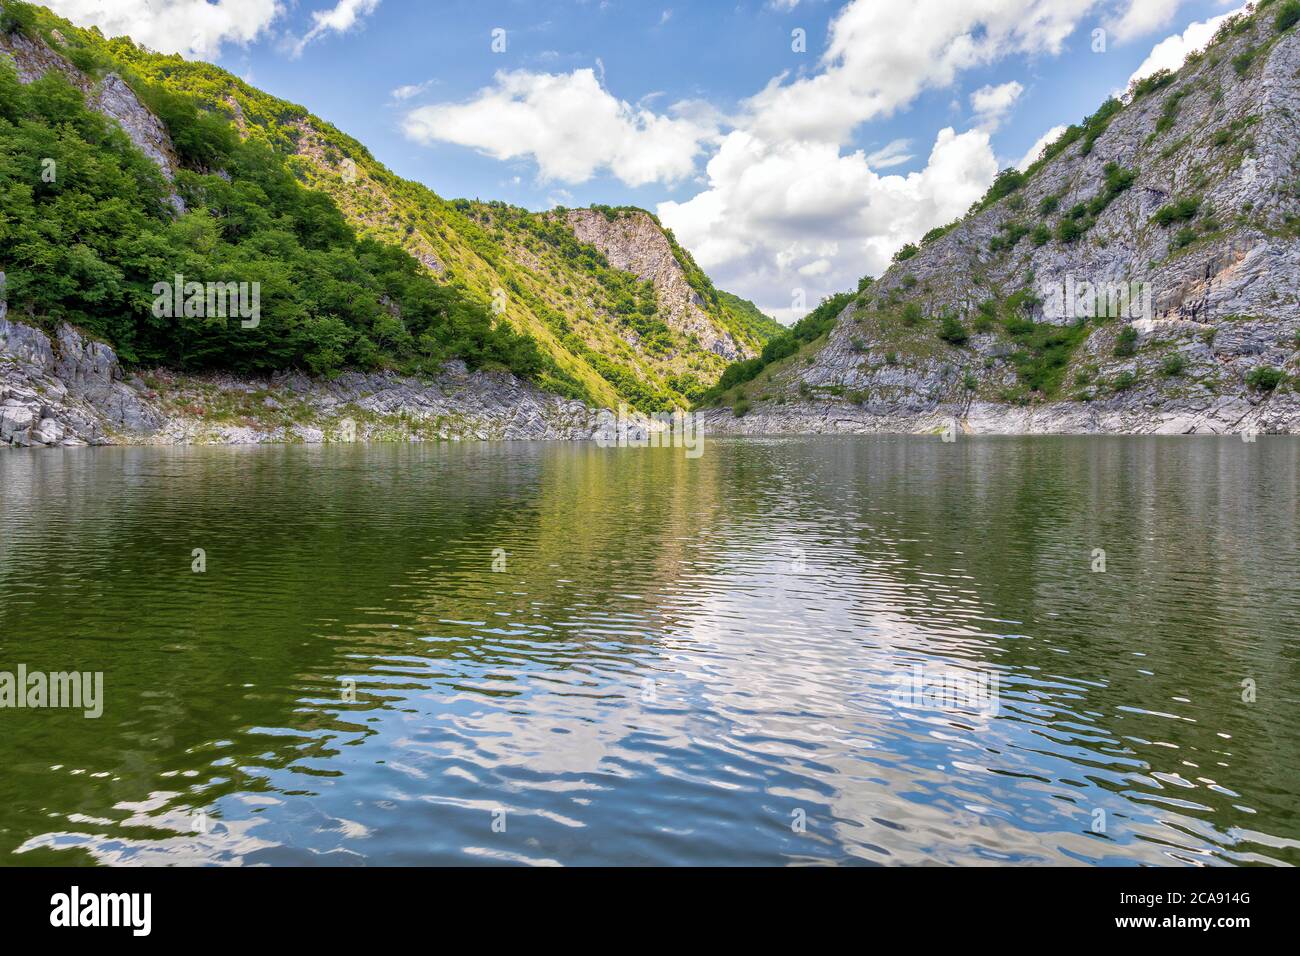 Uvac river canyon meanders. Special Nature Reserve, popular tourist destination in southwestern Serbia. Stock Photo